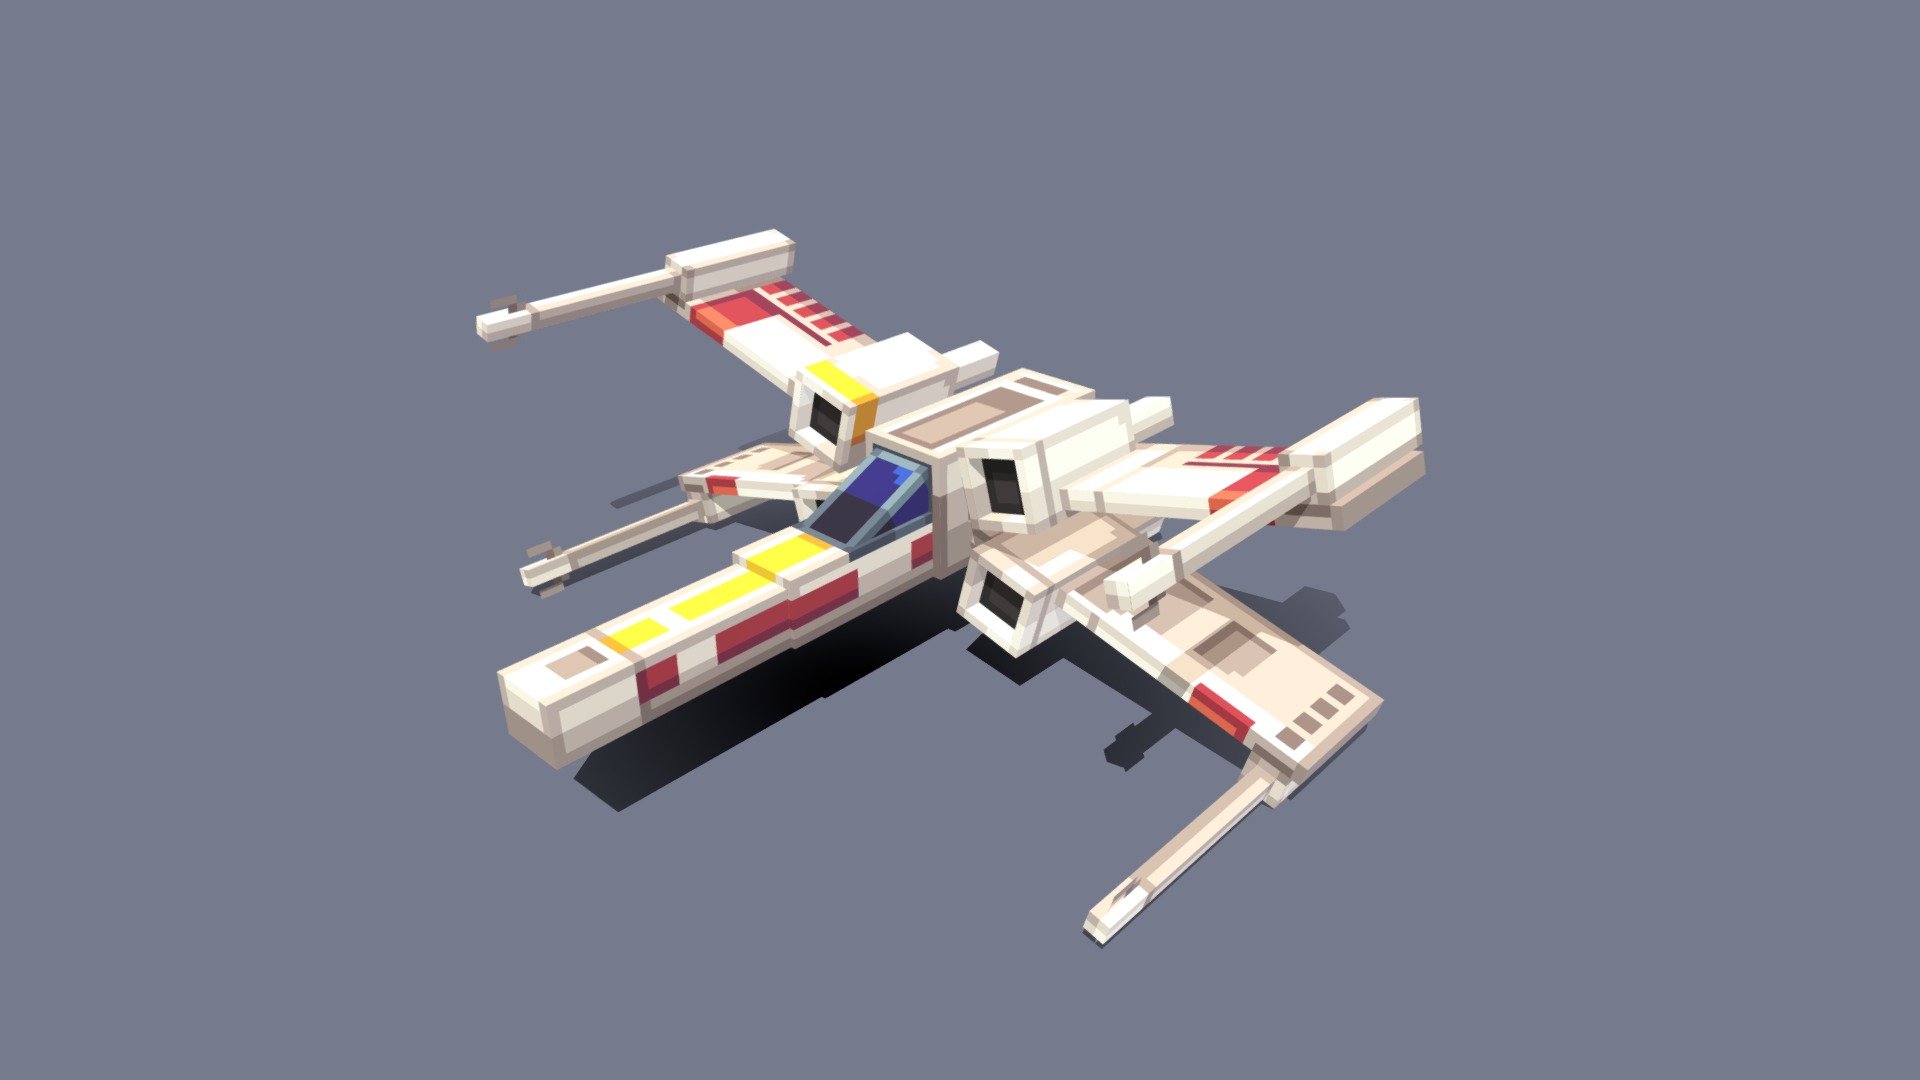 This is one of my latest 3D models made in blockbench. I hope you like it! - X-Wing - 3D model by Fyrtarn (@ArtistFyrtarn) 3d model